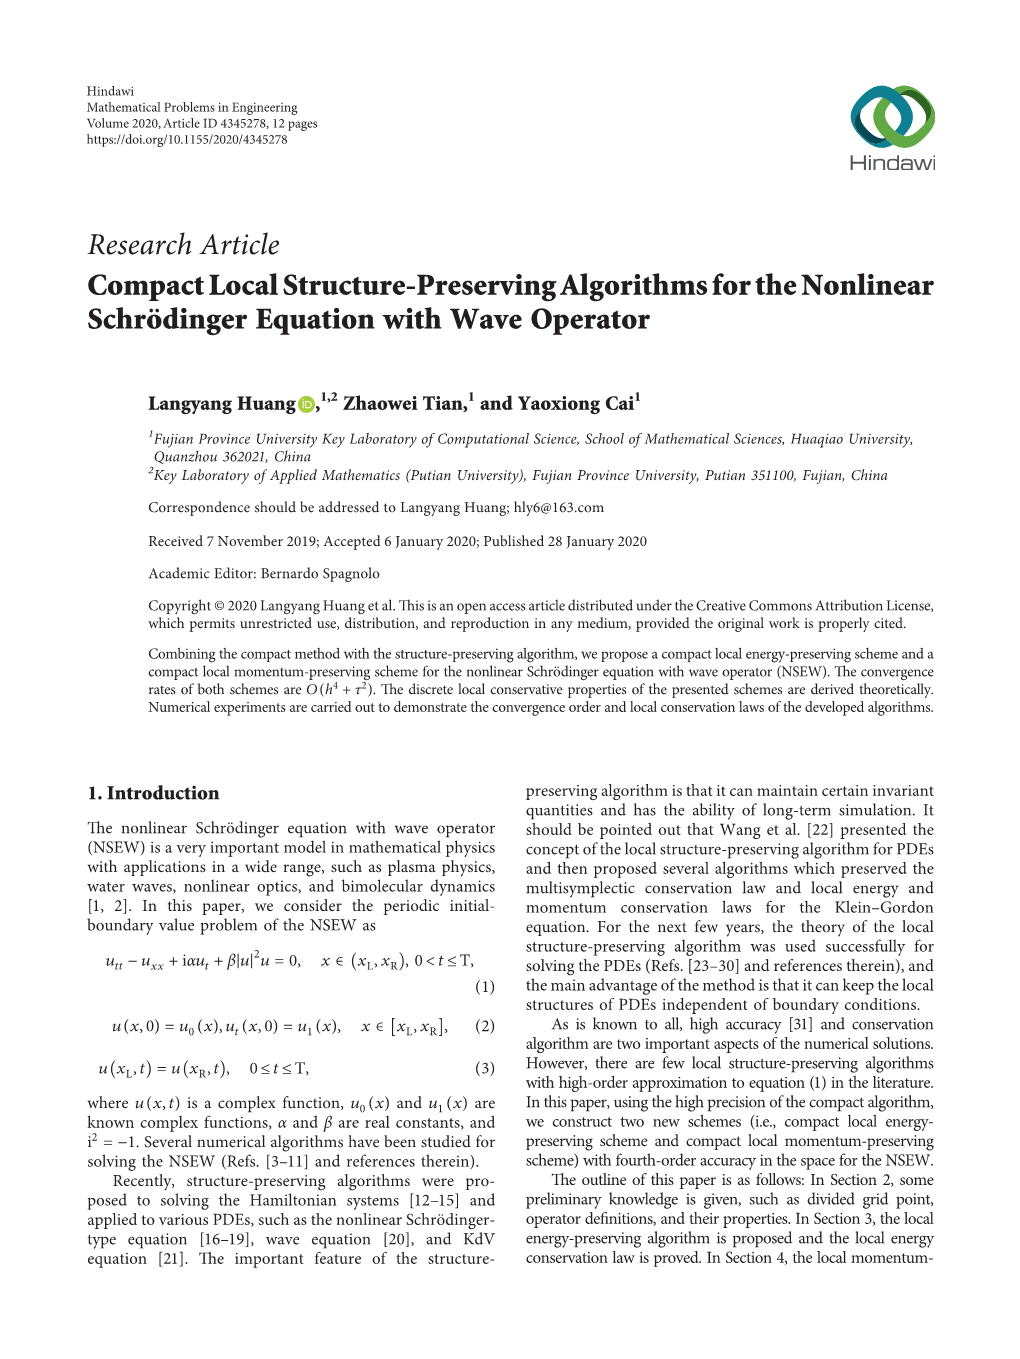 Compact Local Structure-Preserving Algorithms for the Nonlinear Schro¨Dinger Equation with Wave Operator